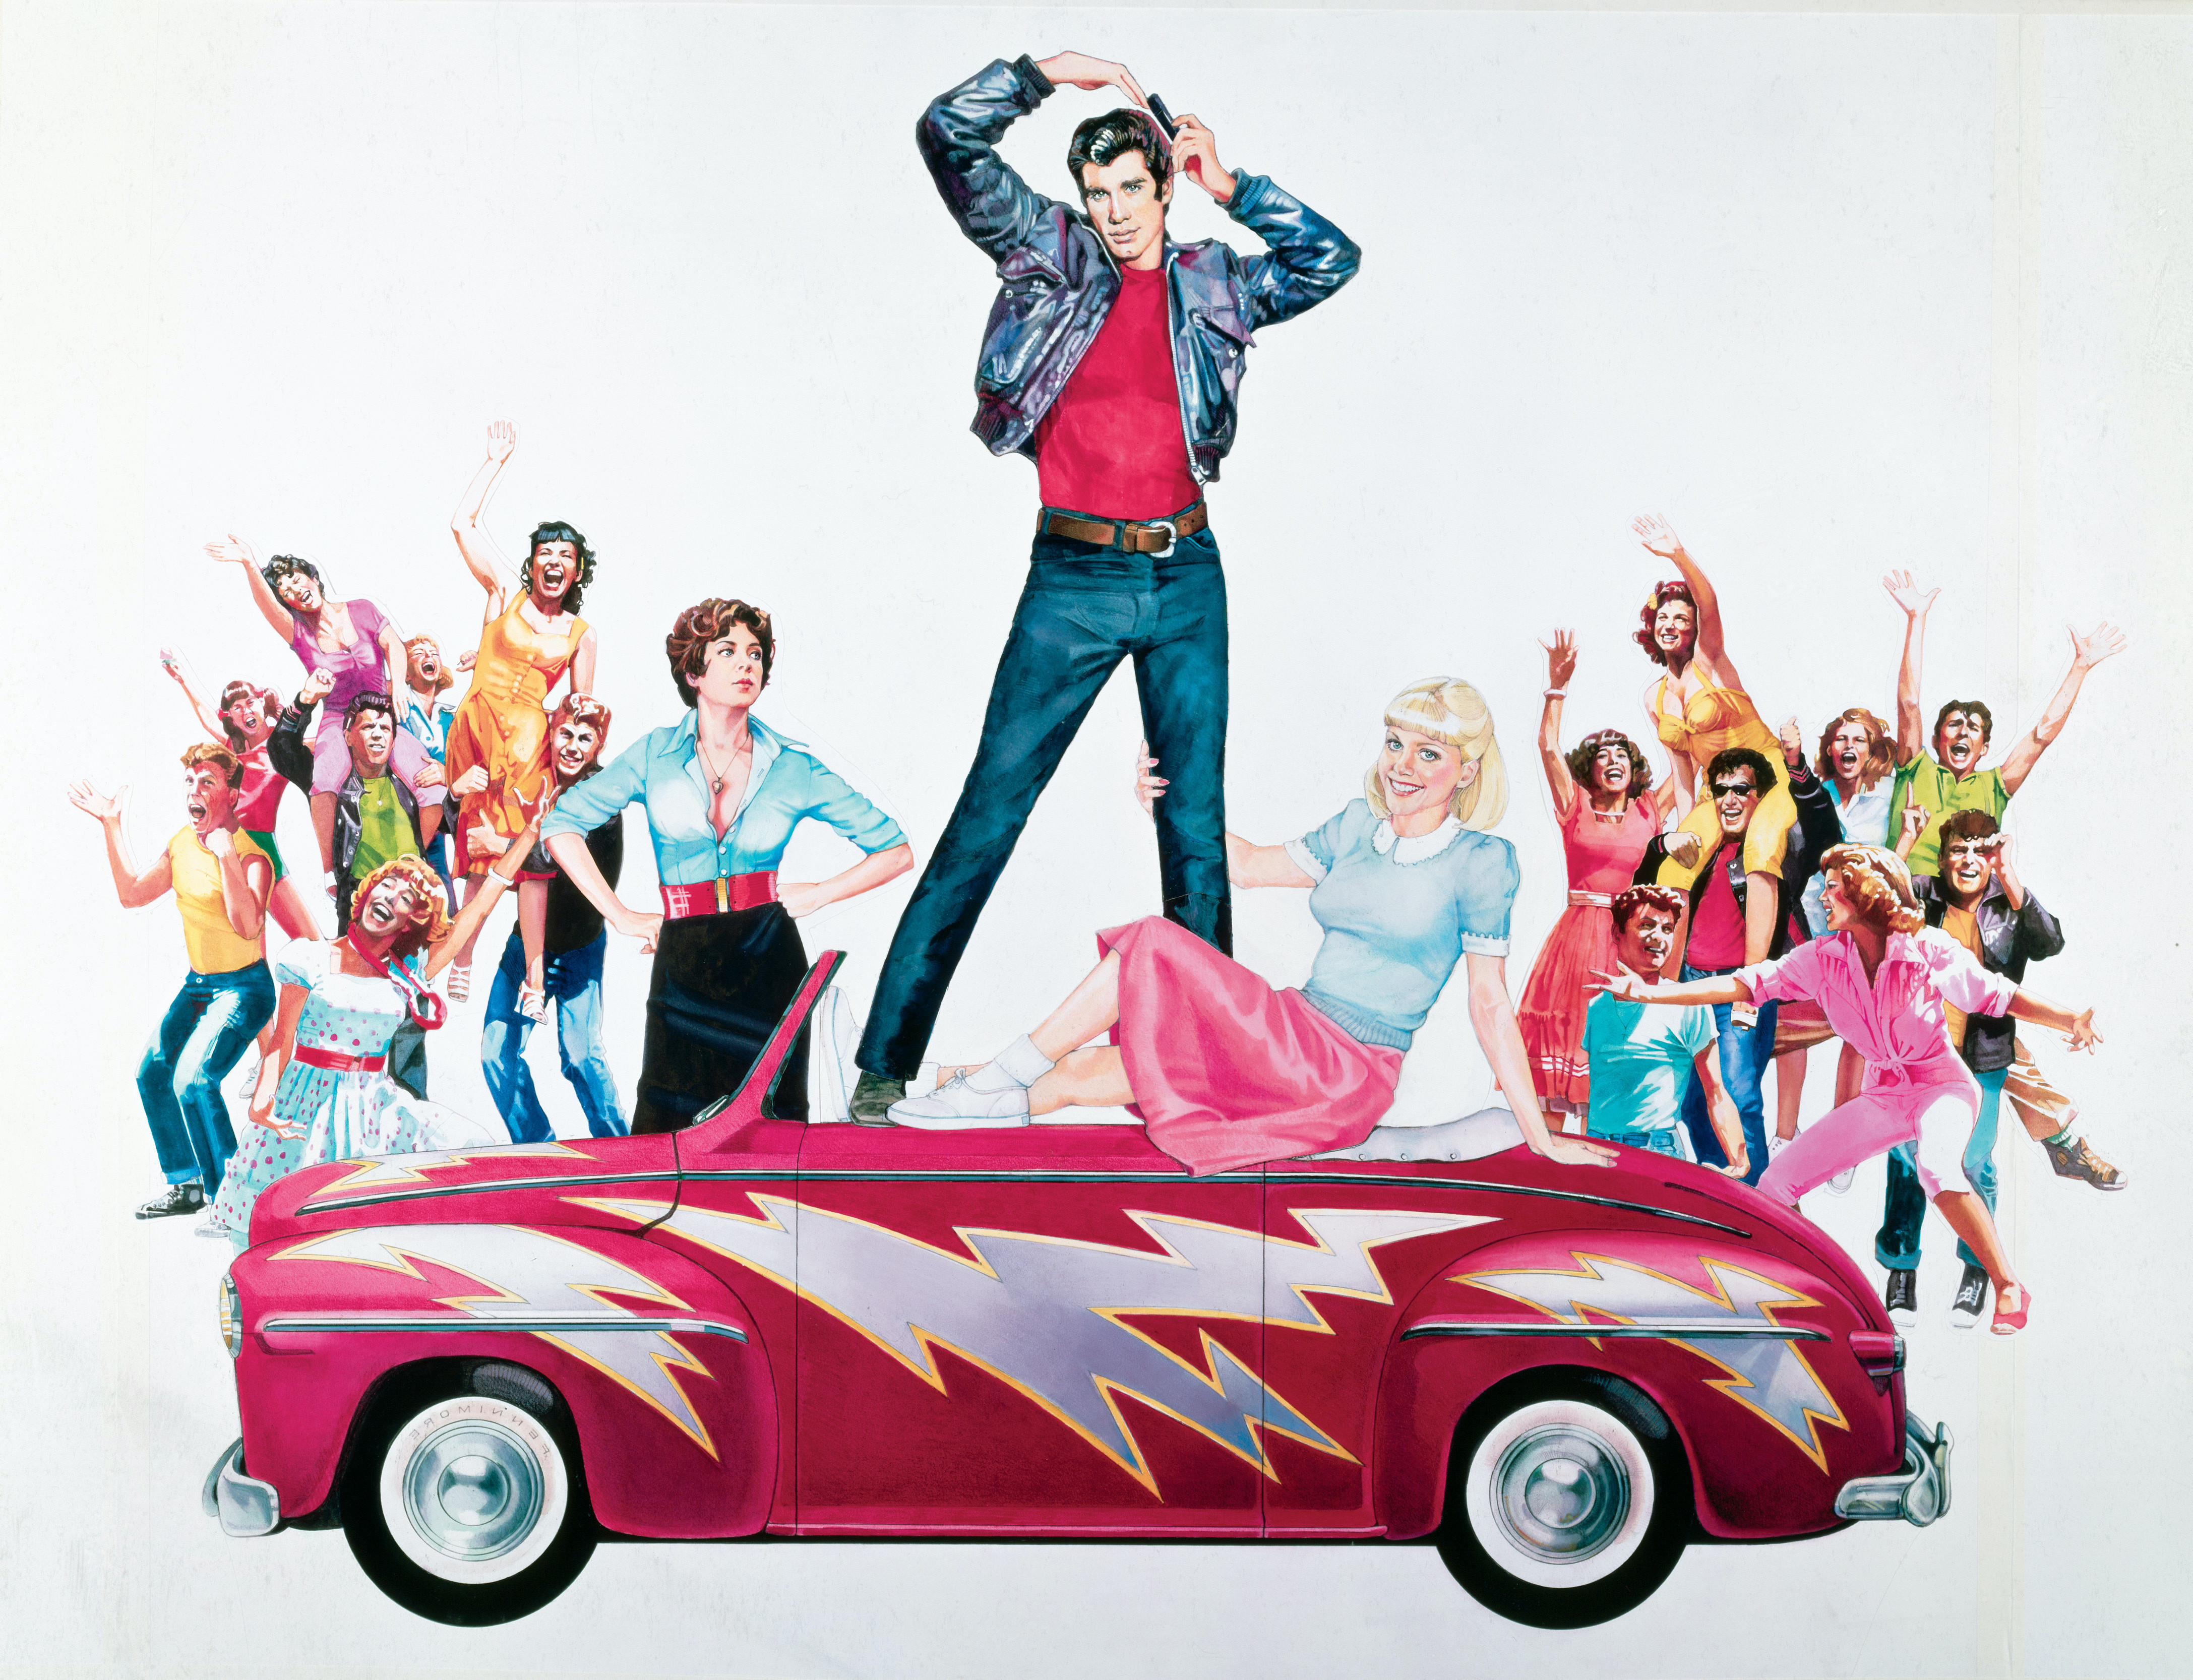 Movie Grease HD Wallpaper | Background Image